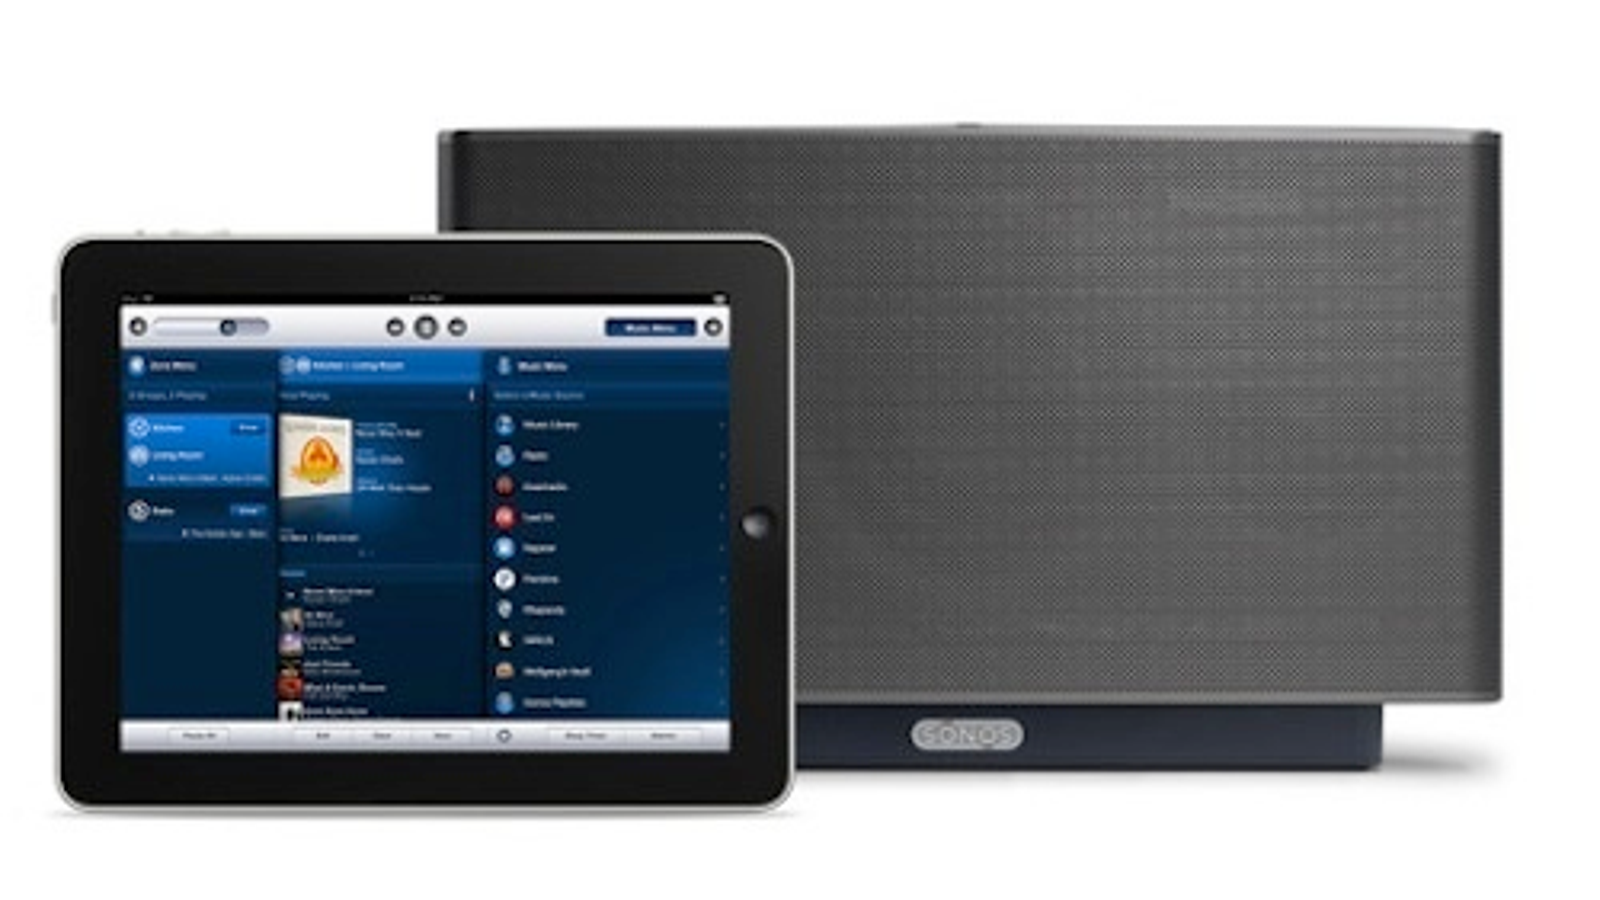 download latest sonos controller software